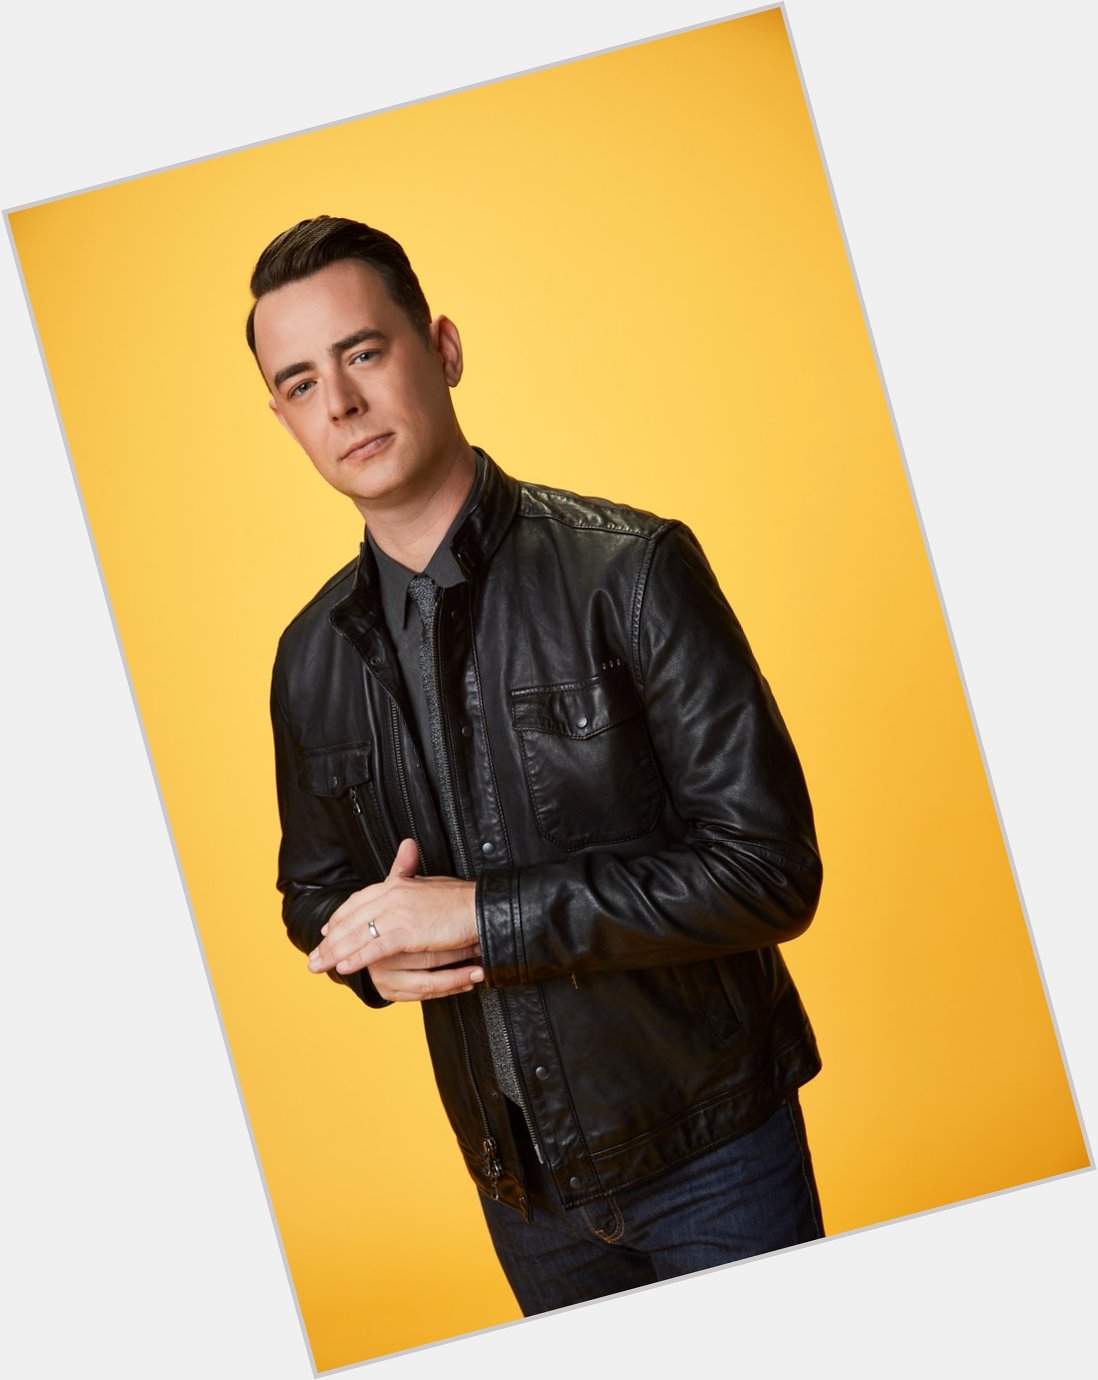 Dropping in to wish Colin Hanks a HAPPY BIRTHDAY! 